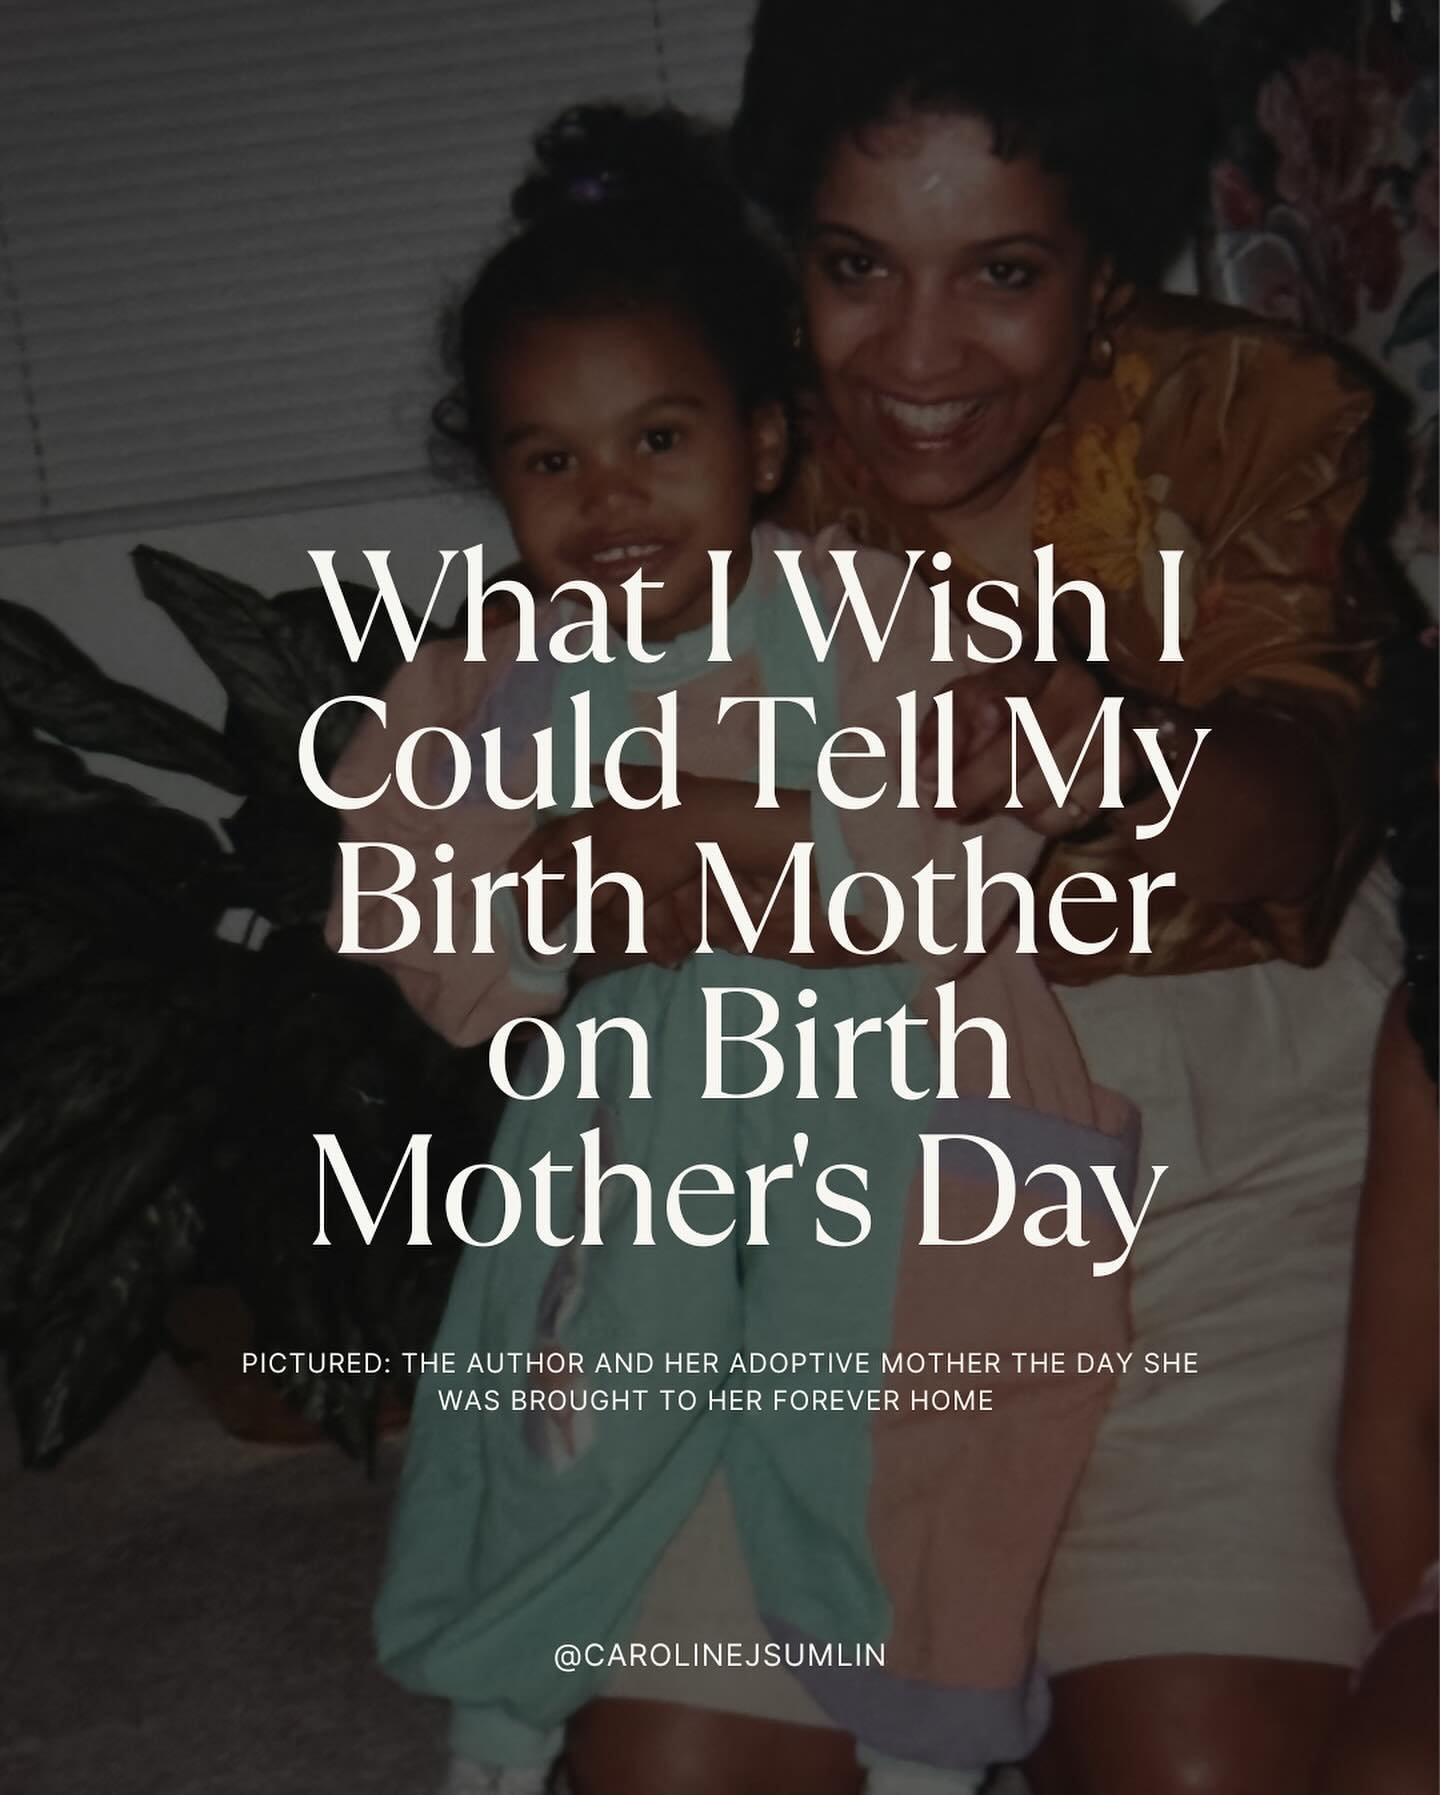 Today is Birth Mother&rsquo;s Day. 

I didn&rsquo;t know Birth Mother&rsquo;s Day was a thing until about a year ago, but I&rsquo;m so glad there&rsquo;s a day dedicated specifically to birth mothers. I don&rsquo;t know my birth mother. I will likely